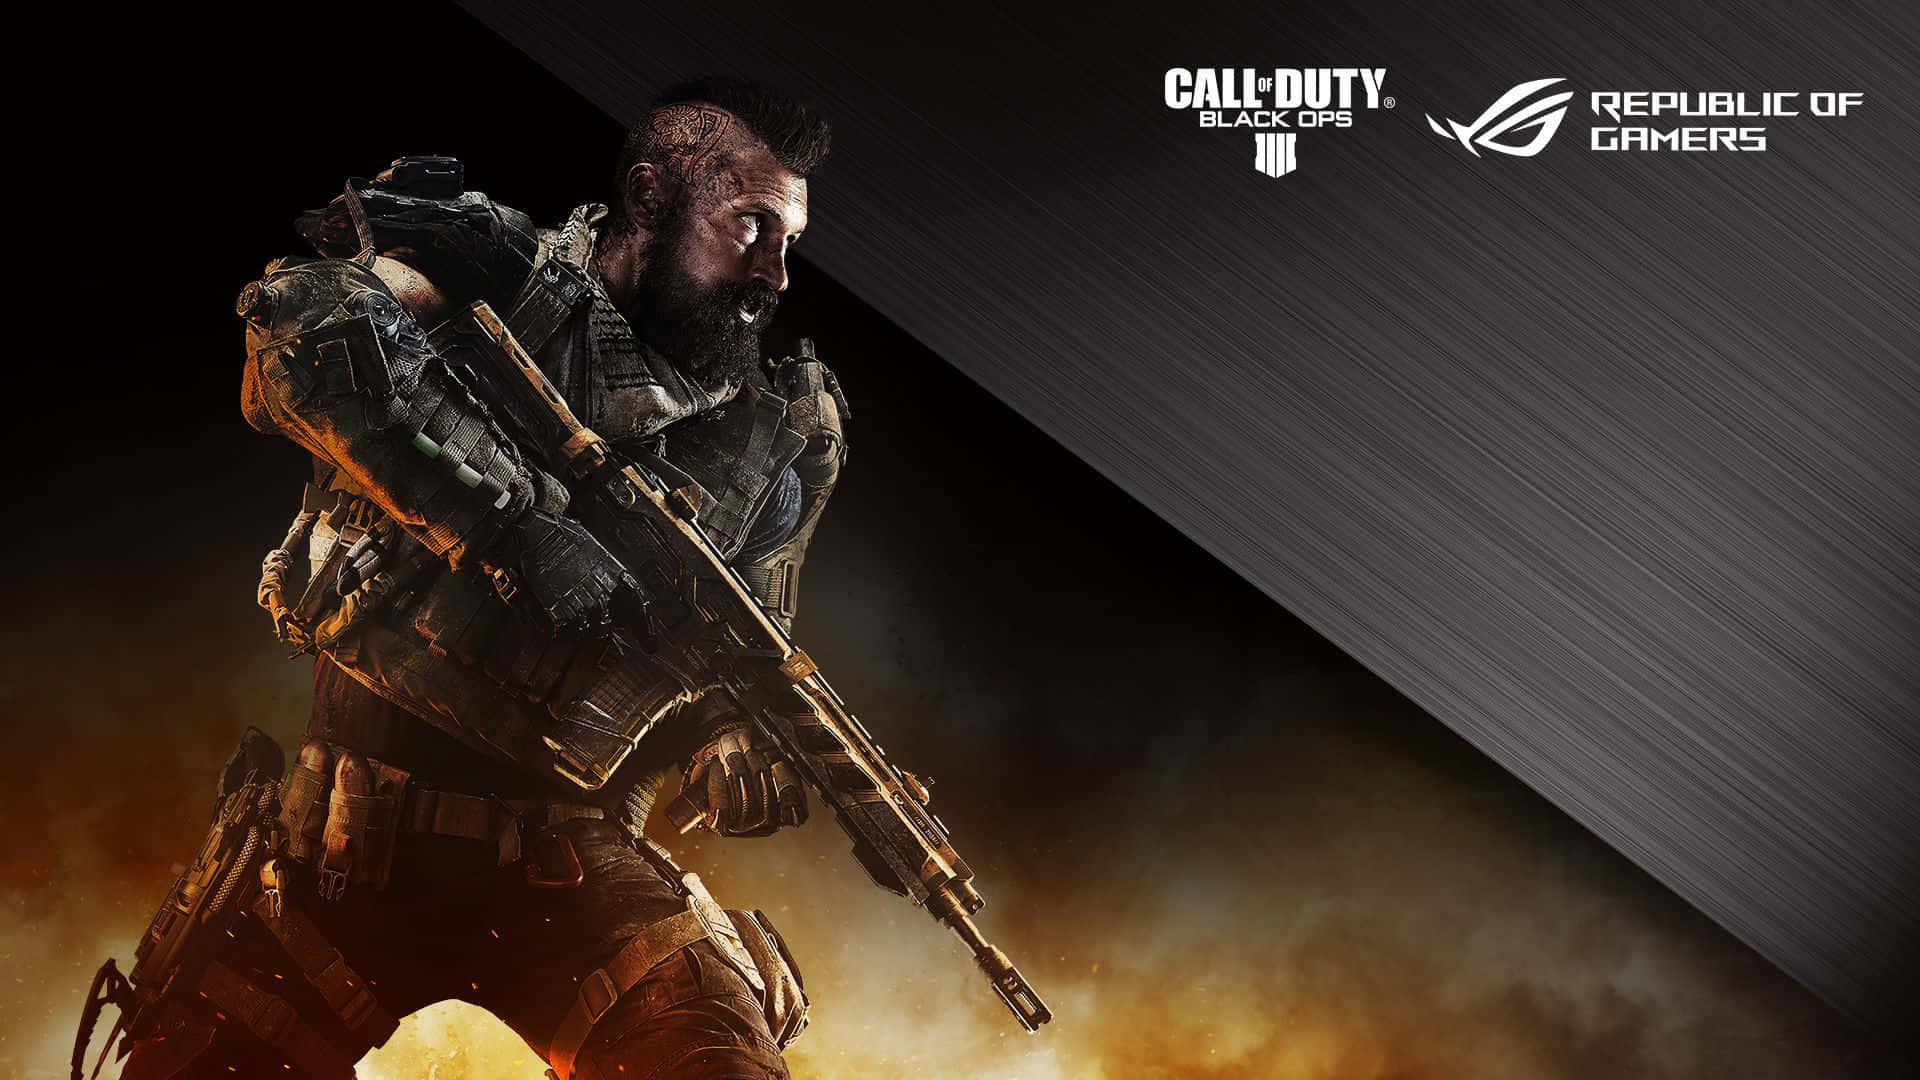 Show your true colors with the latest edition of Call Of Duty: Black Ops 4.